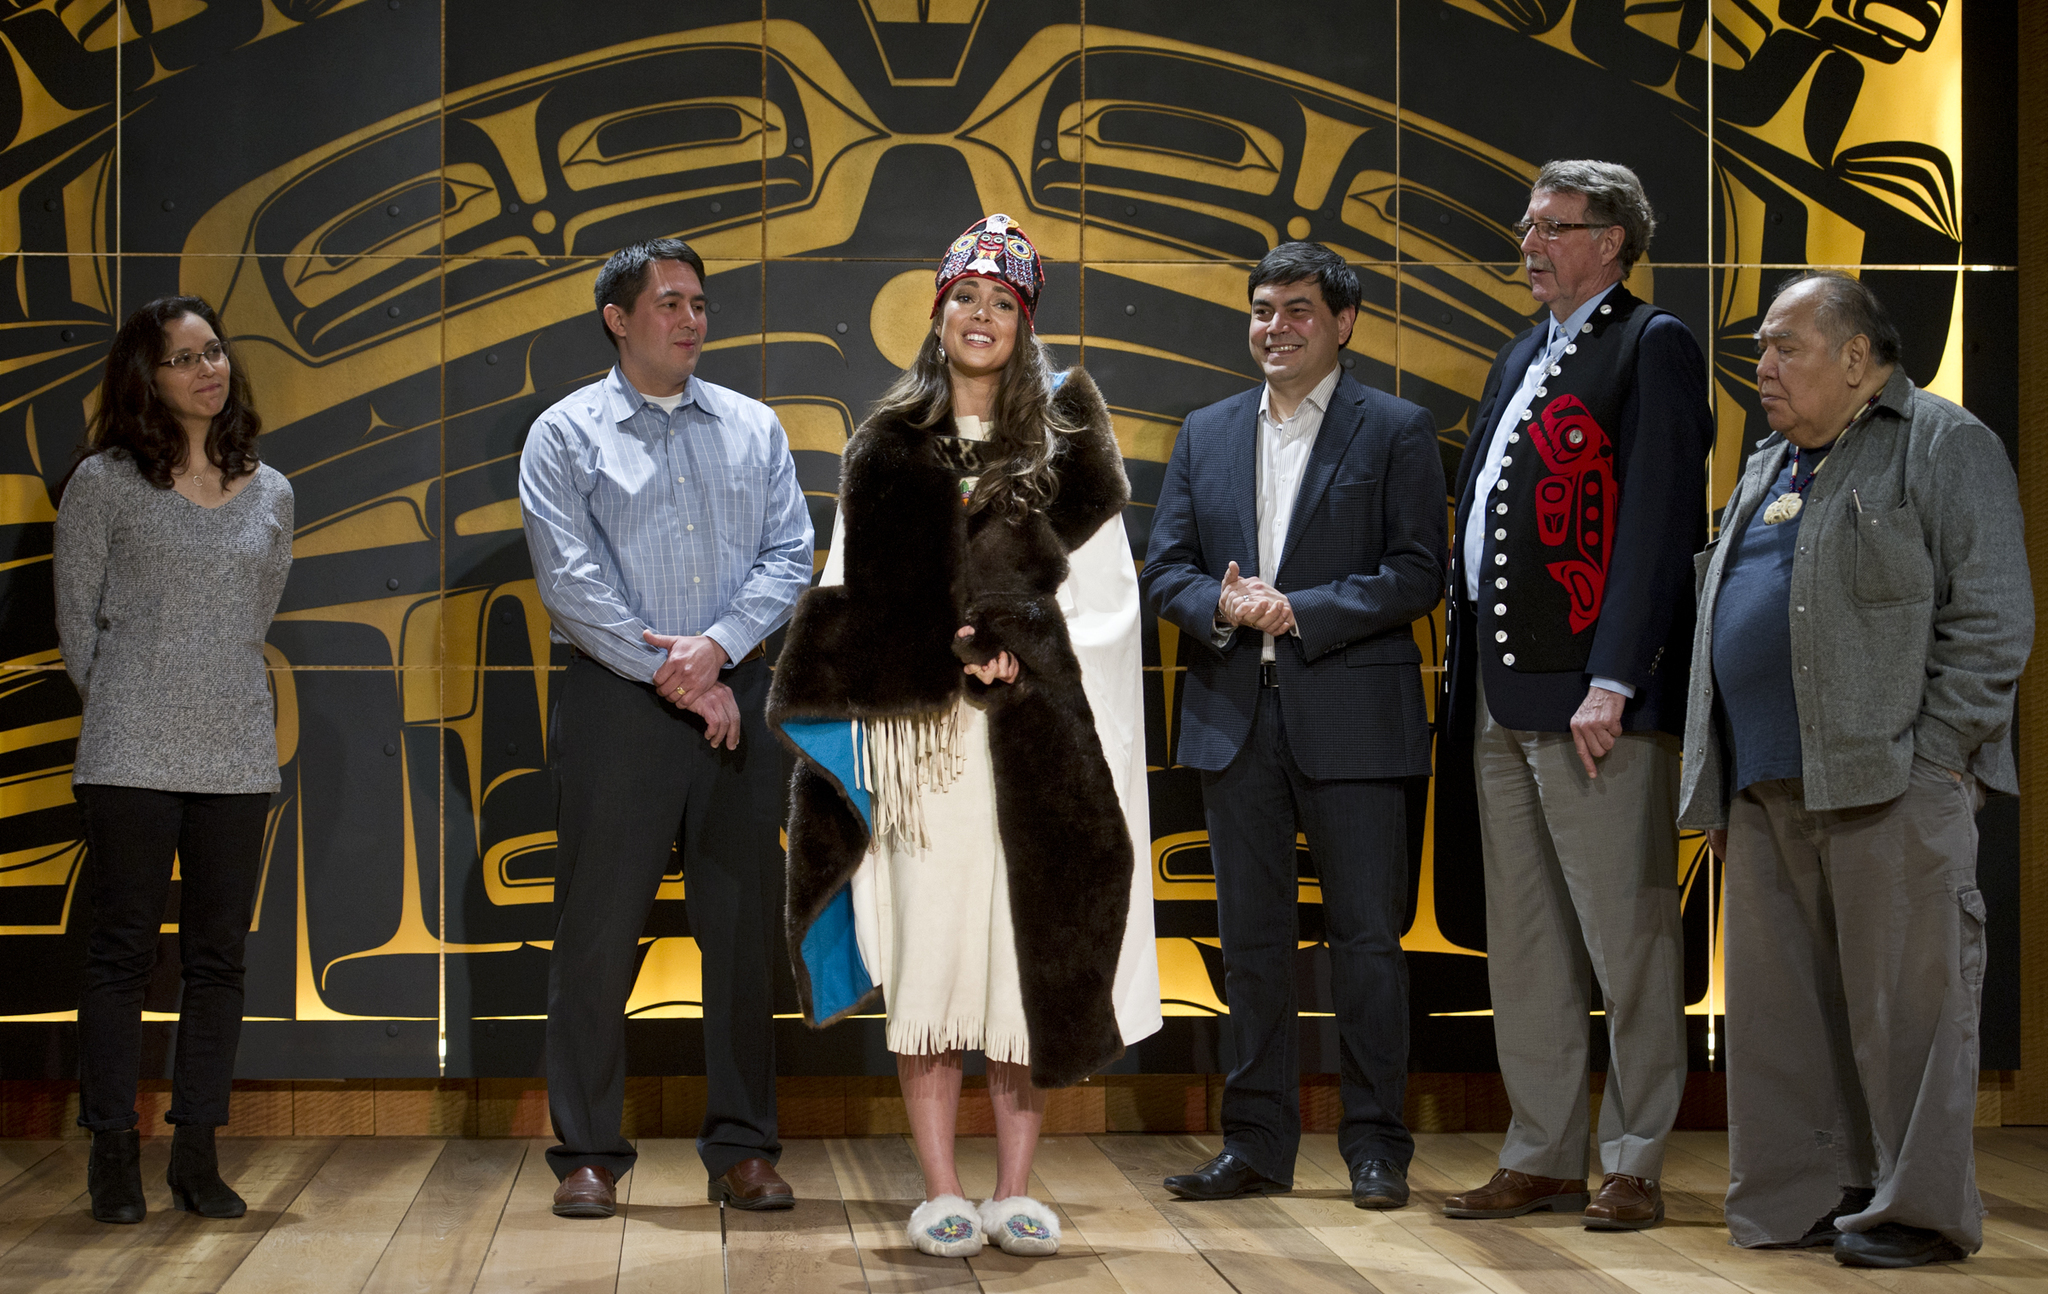 225;di), a Tlingit Eagle of the Killerwhale Clan, won the title on Feb. 4 and will now contend in the Miss USA Competition. London is the first Tlingit to hold the Miss Alaska USA title. (Michael Penn | Juneau Empire)